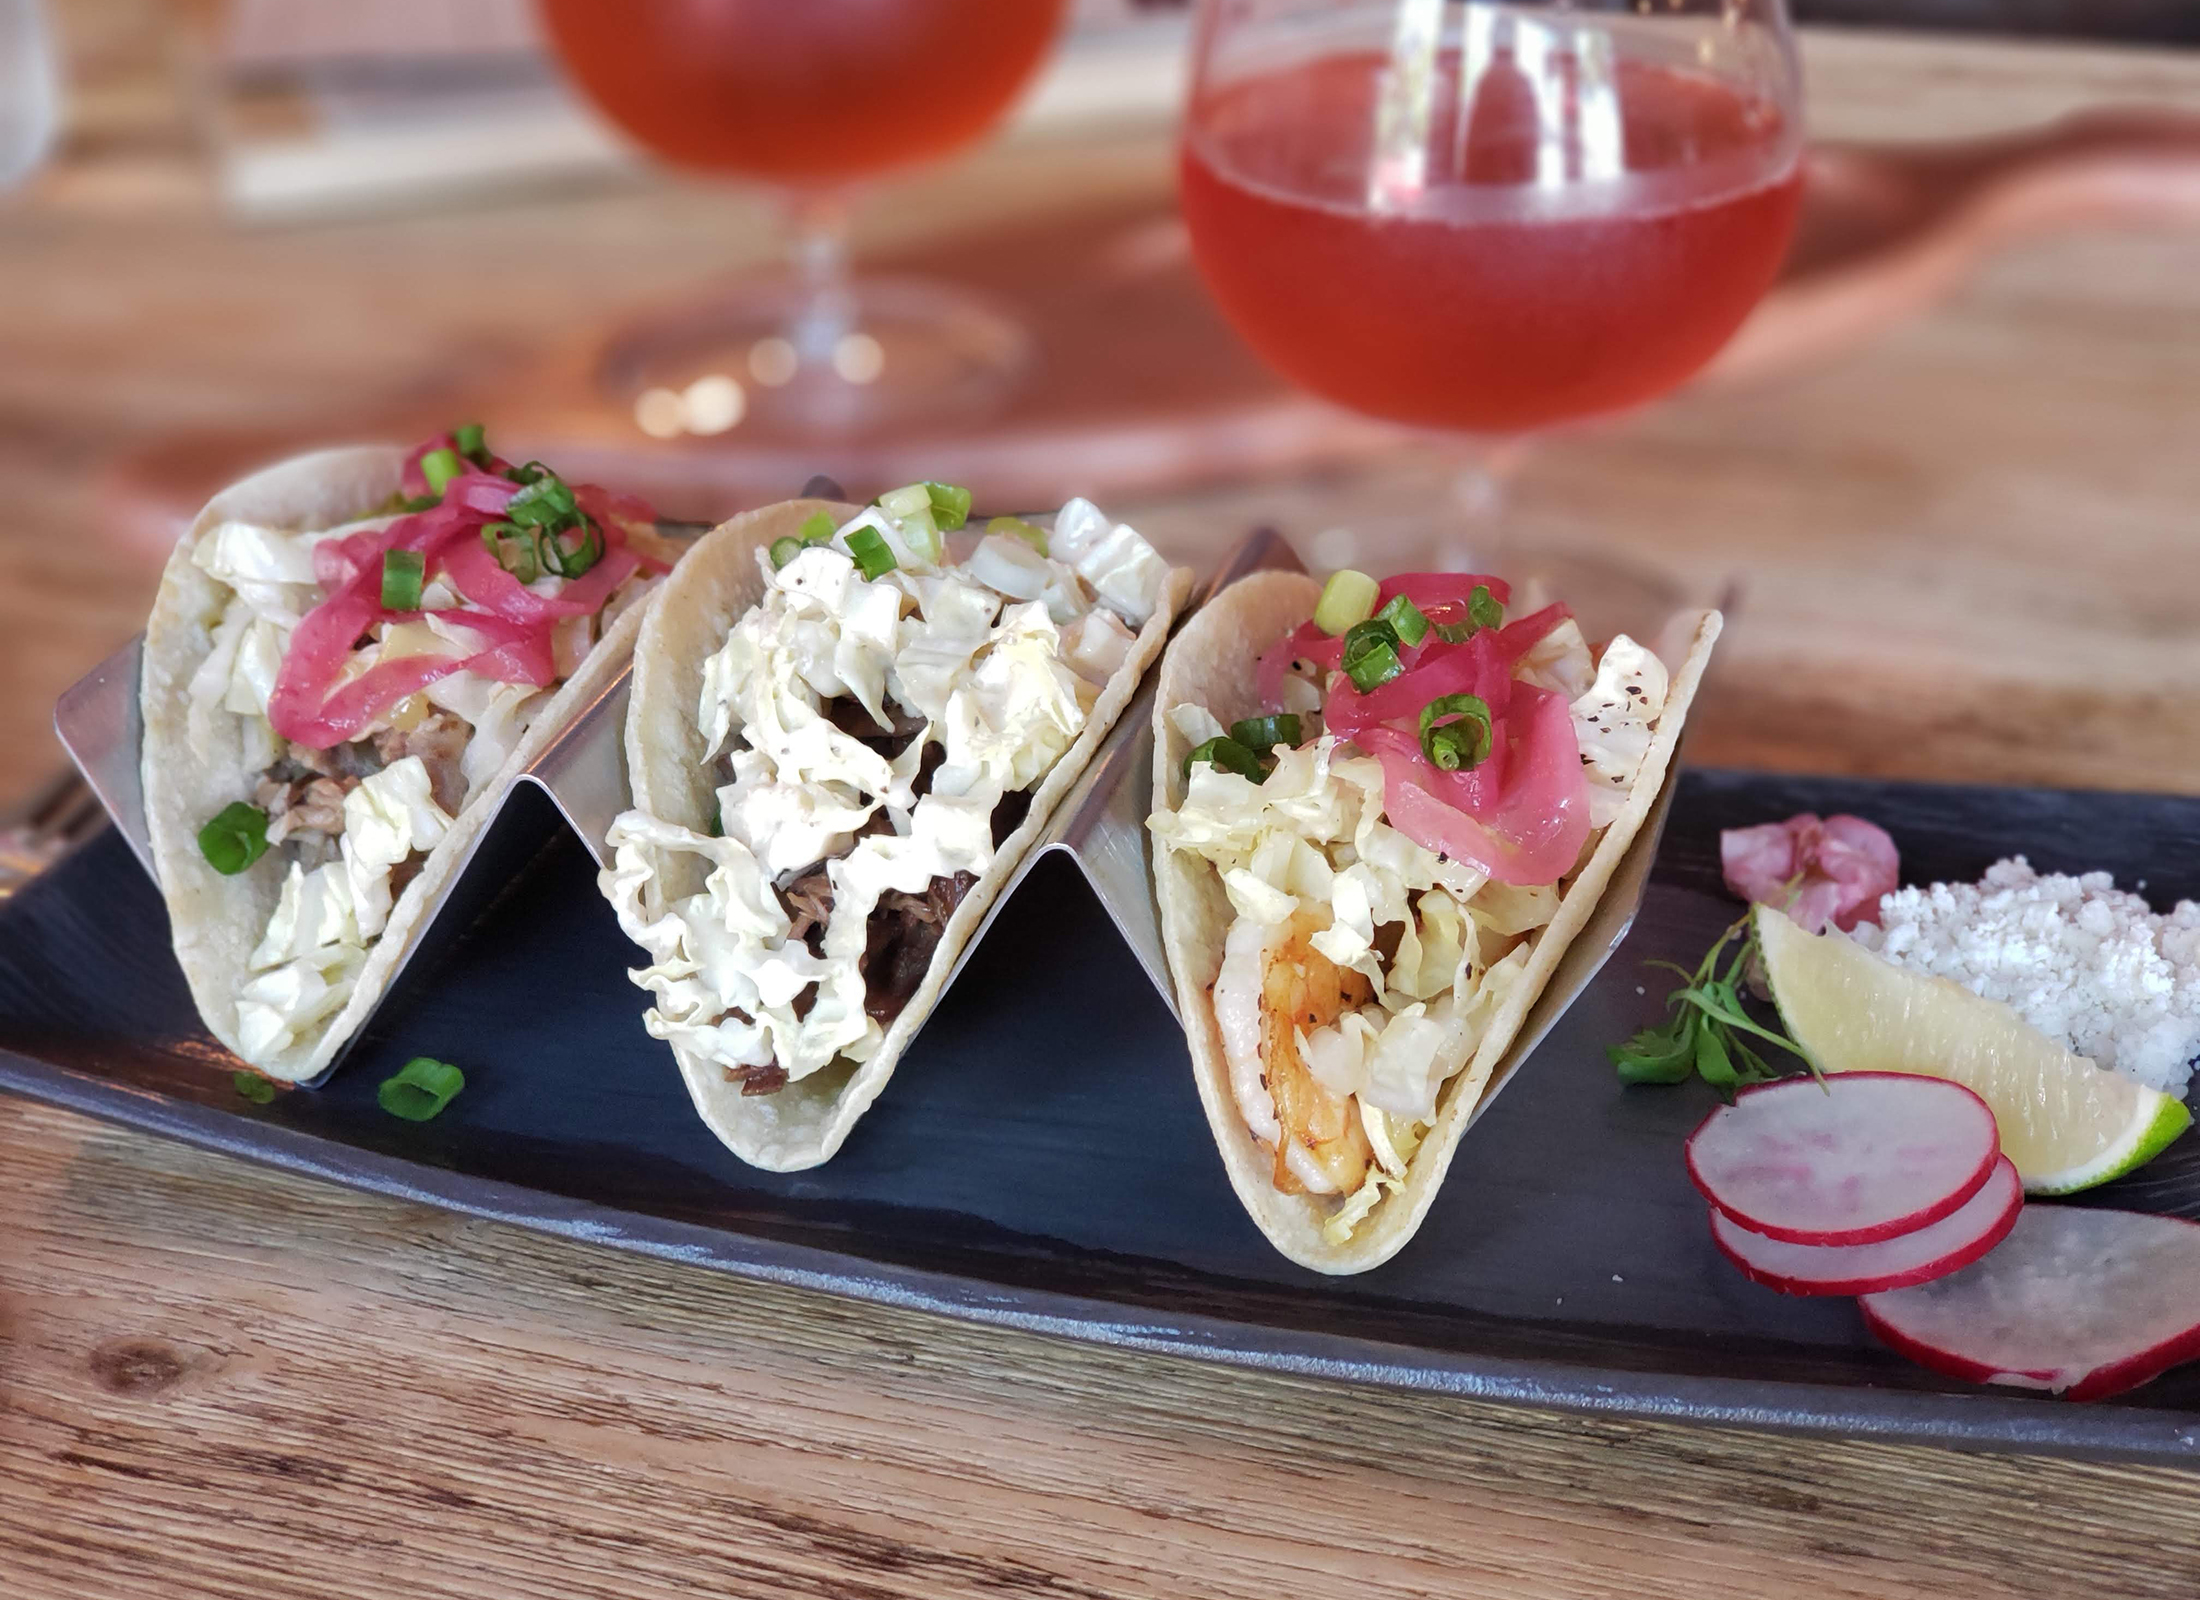 Taco trio and rose gose at Barrels, Brews and Bites in Healdsburg. Heather Irwin/PD